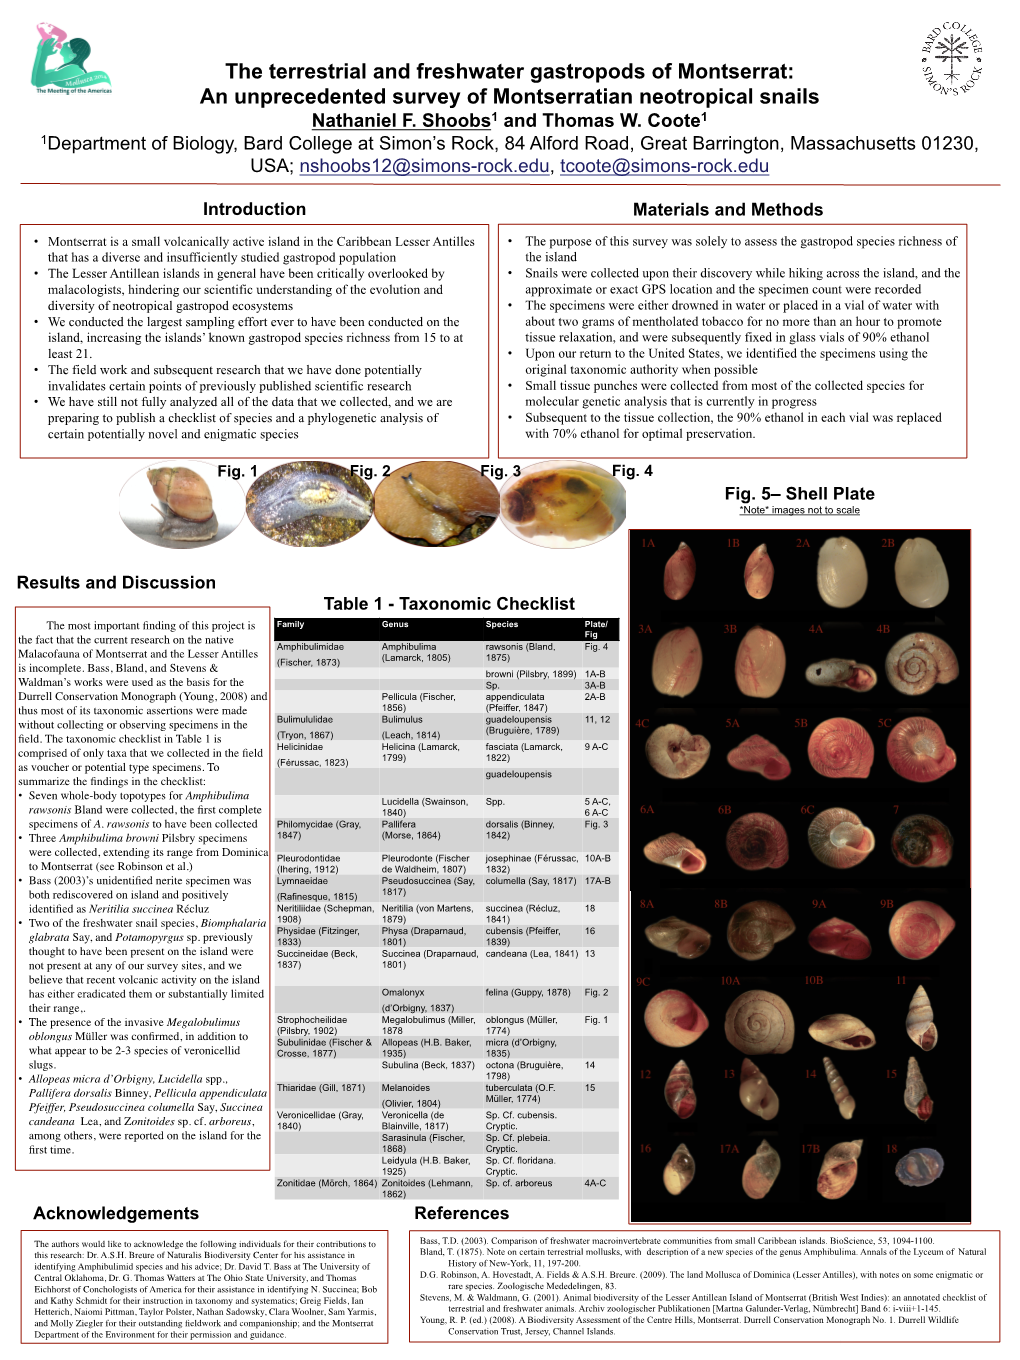 The Terrestrial and Freshwater Gastropods of Montserrat: An